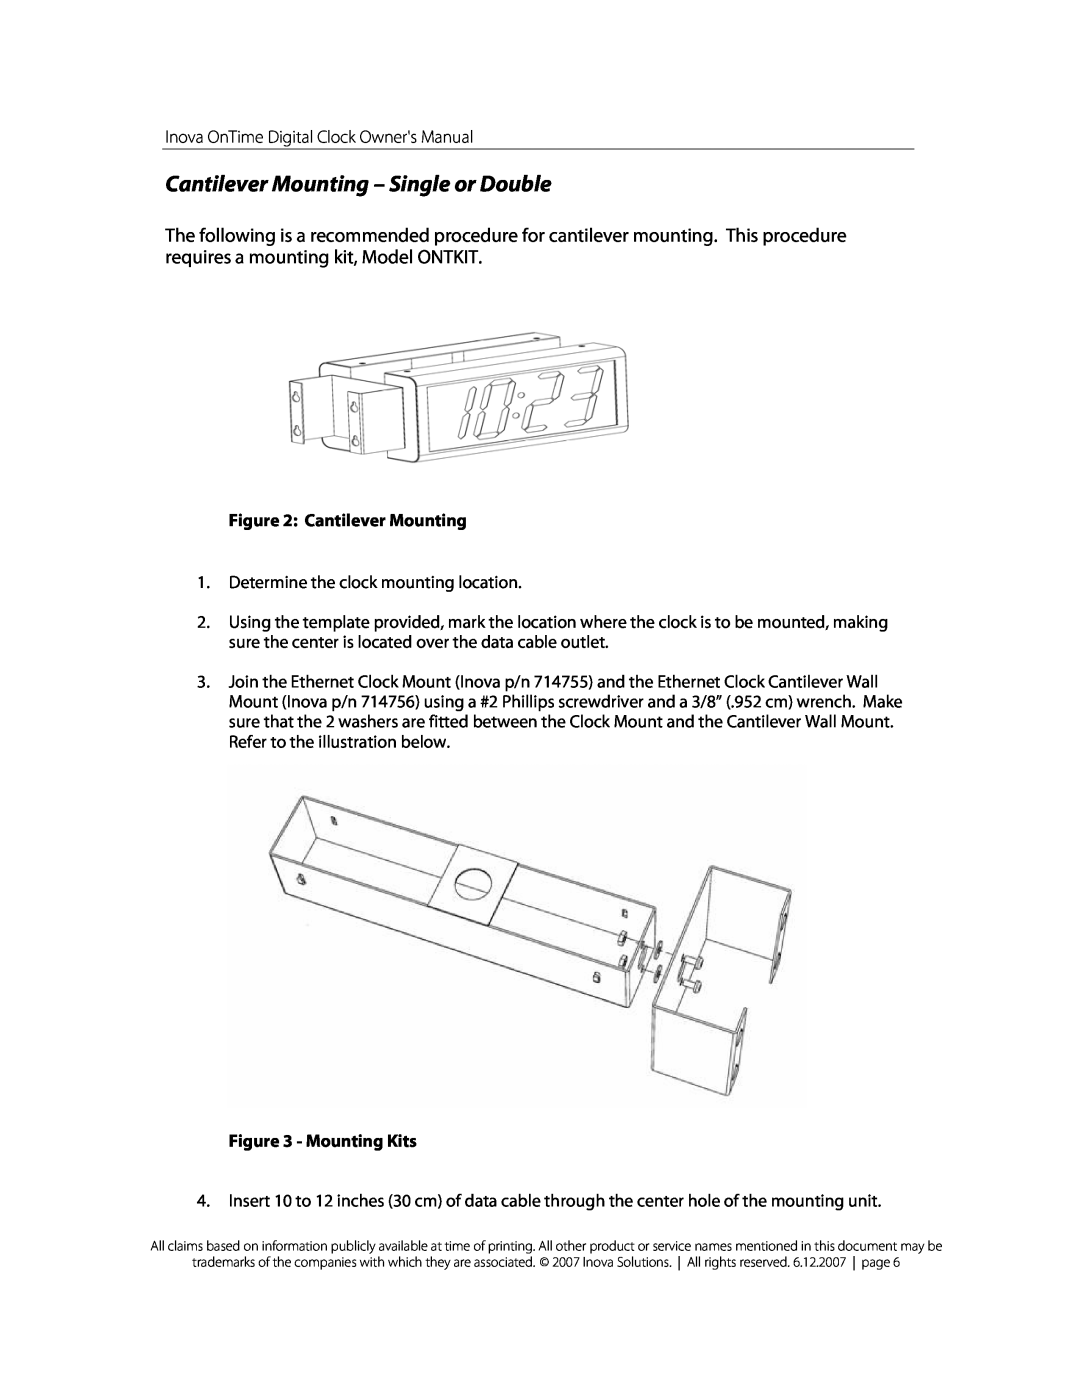 Inova OnTimeTM owner manual Cantilever Mounting - Single or Double, Mounting Kits 